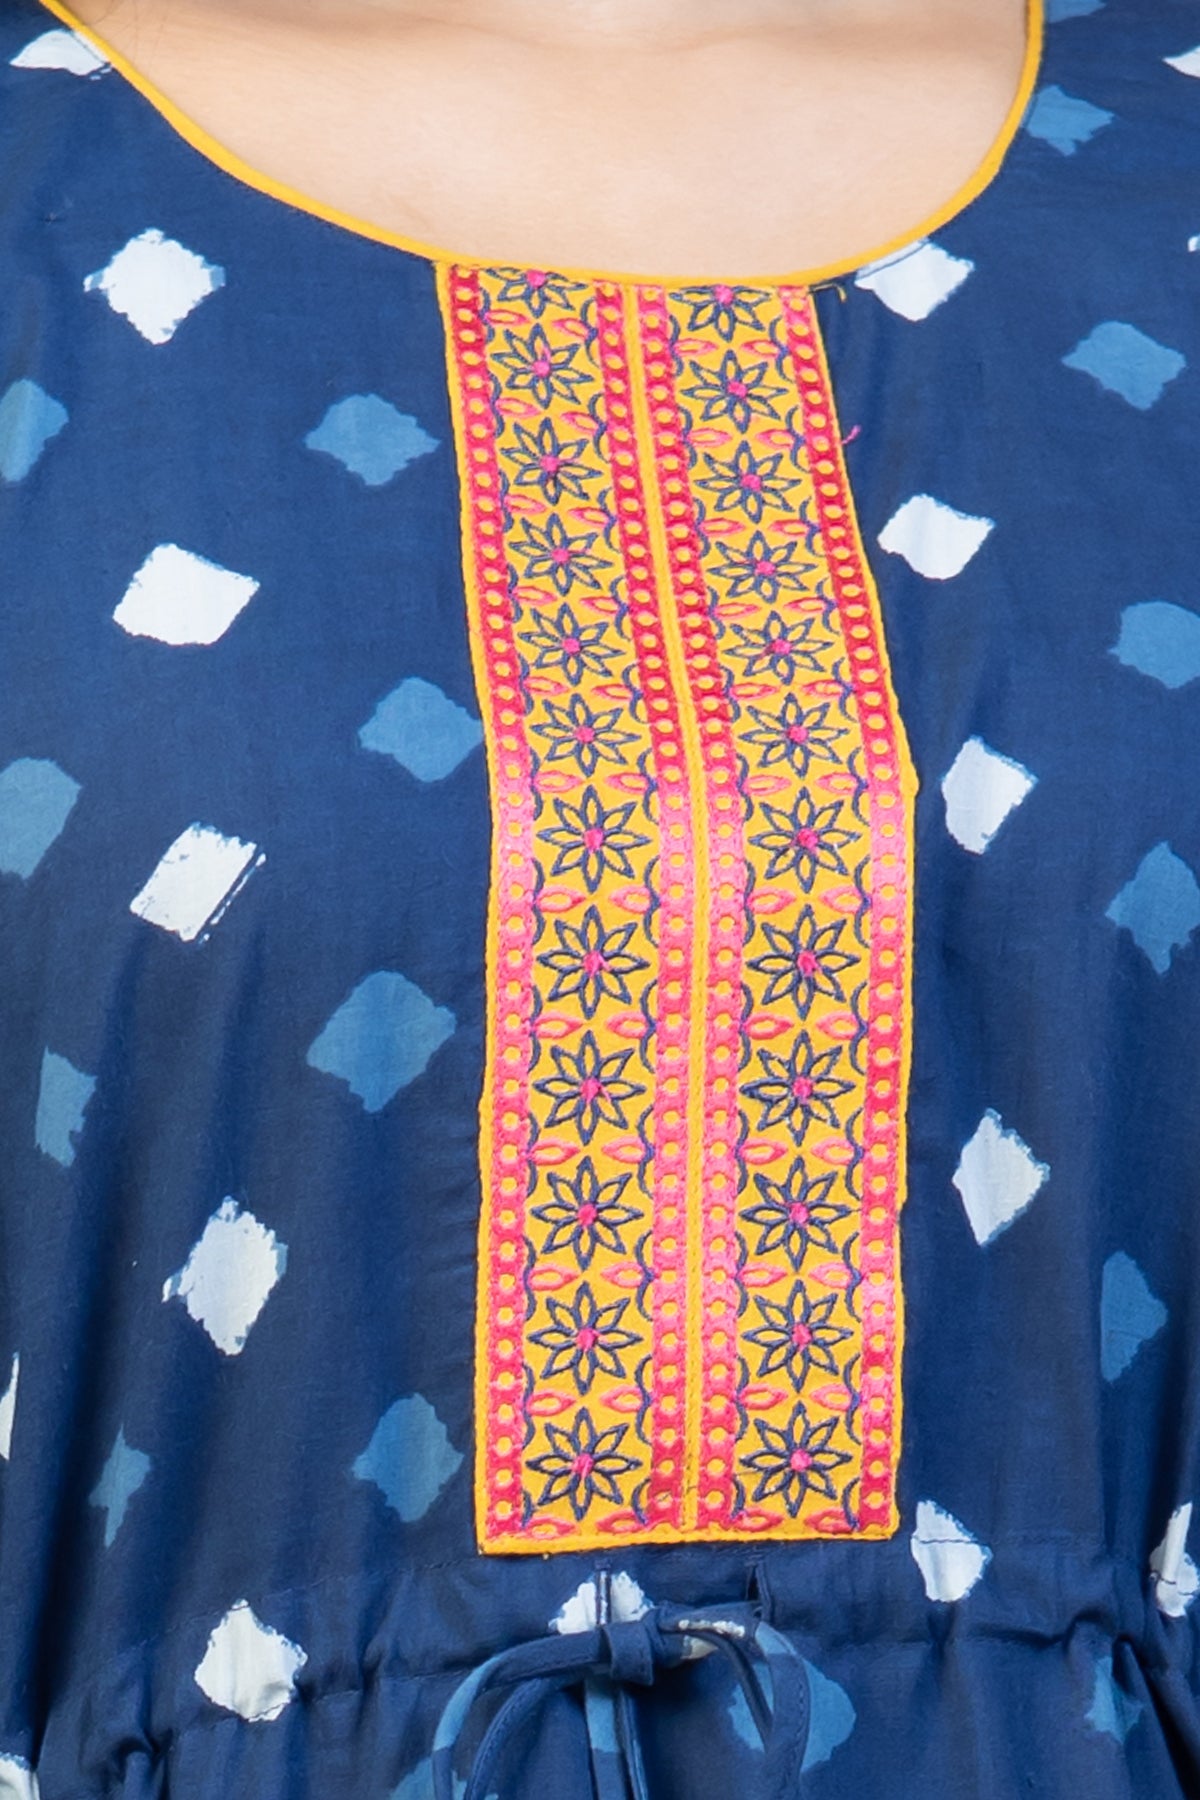 All Over Geometric Printed With Floral Embroidered Yoke Kaftan Nighty Blue